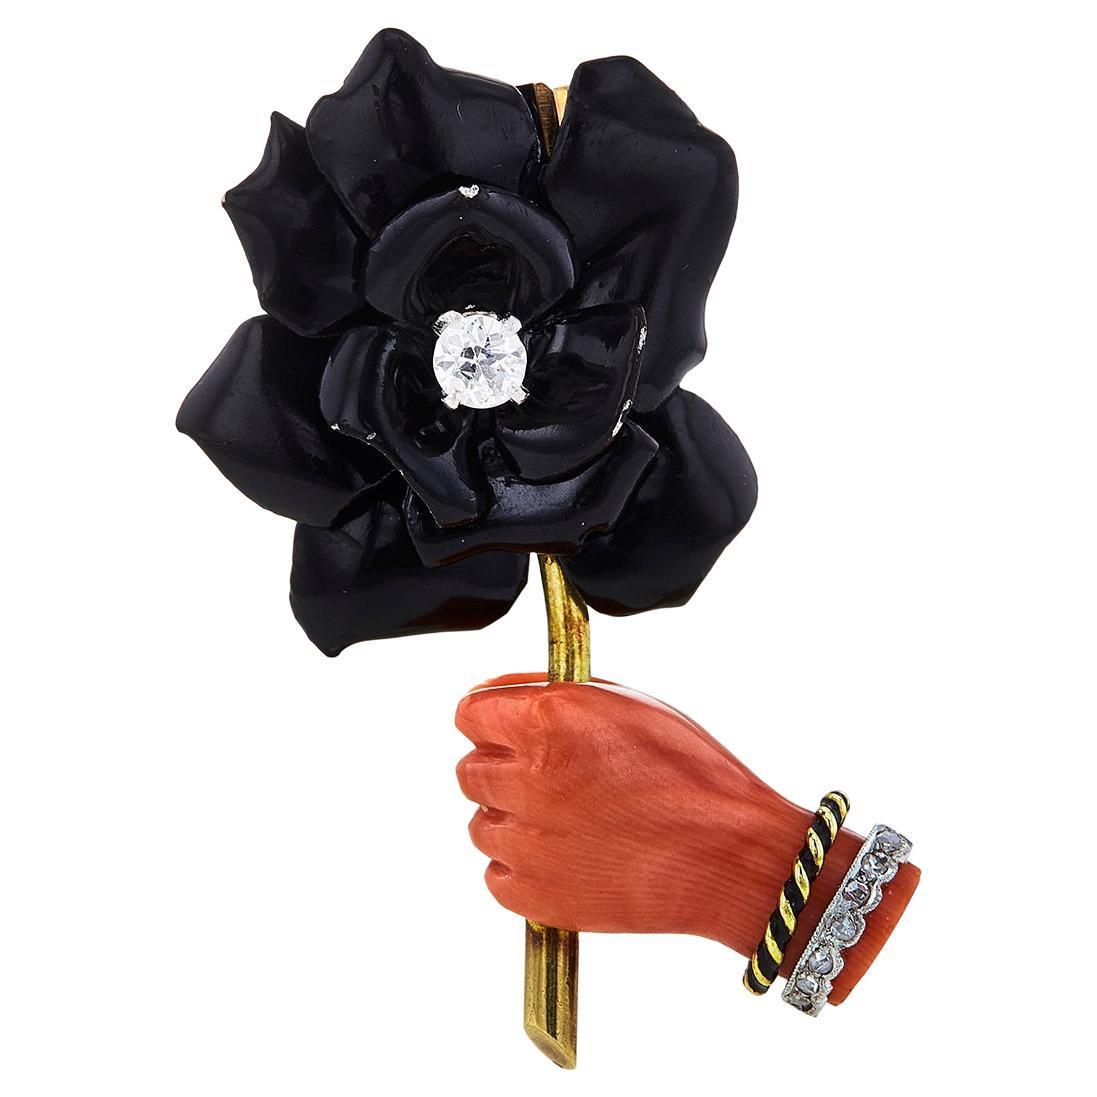 Authentic Cartier Paris clip-brooch crafted in 18 karat yellow gold, featuring a carved orangey red coral hand holding a black enamel flower centering an Old European Cut diamond weighing approximately .25 carats.  The coral hand is further enhanced